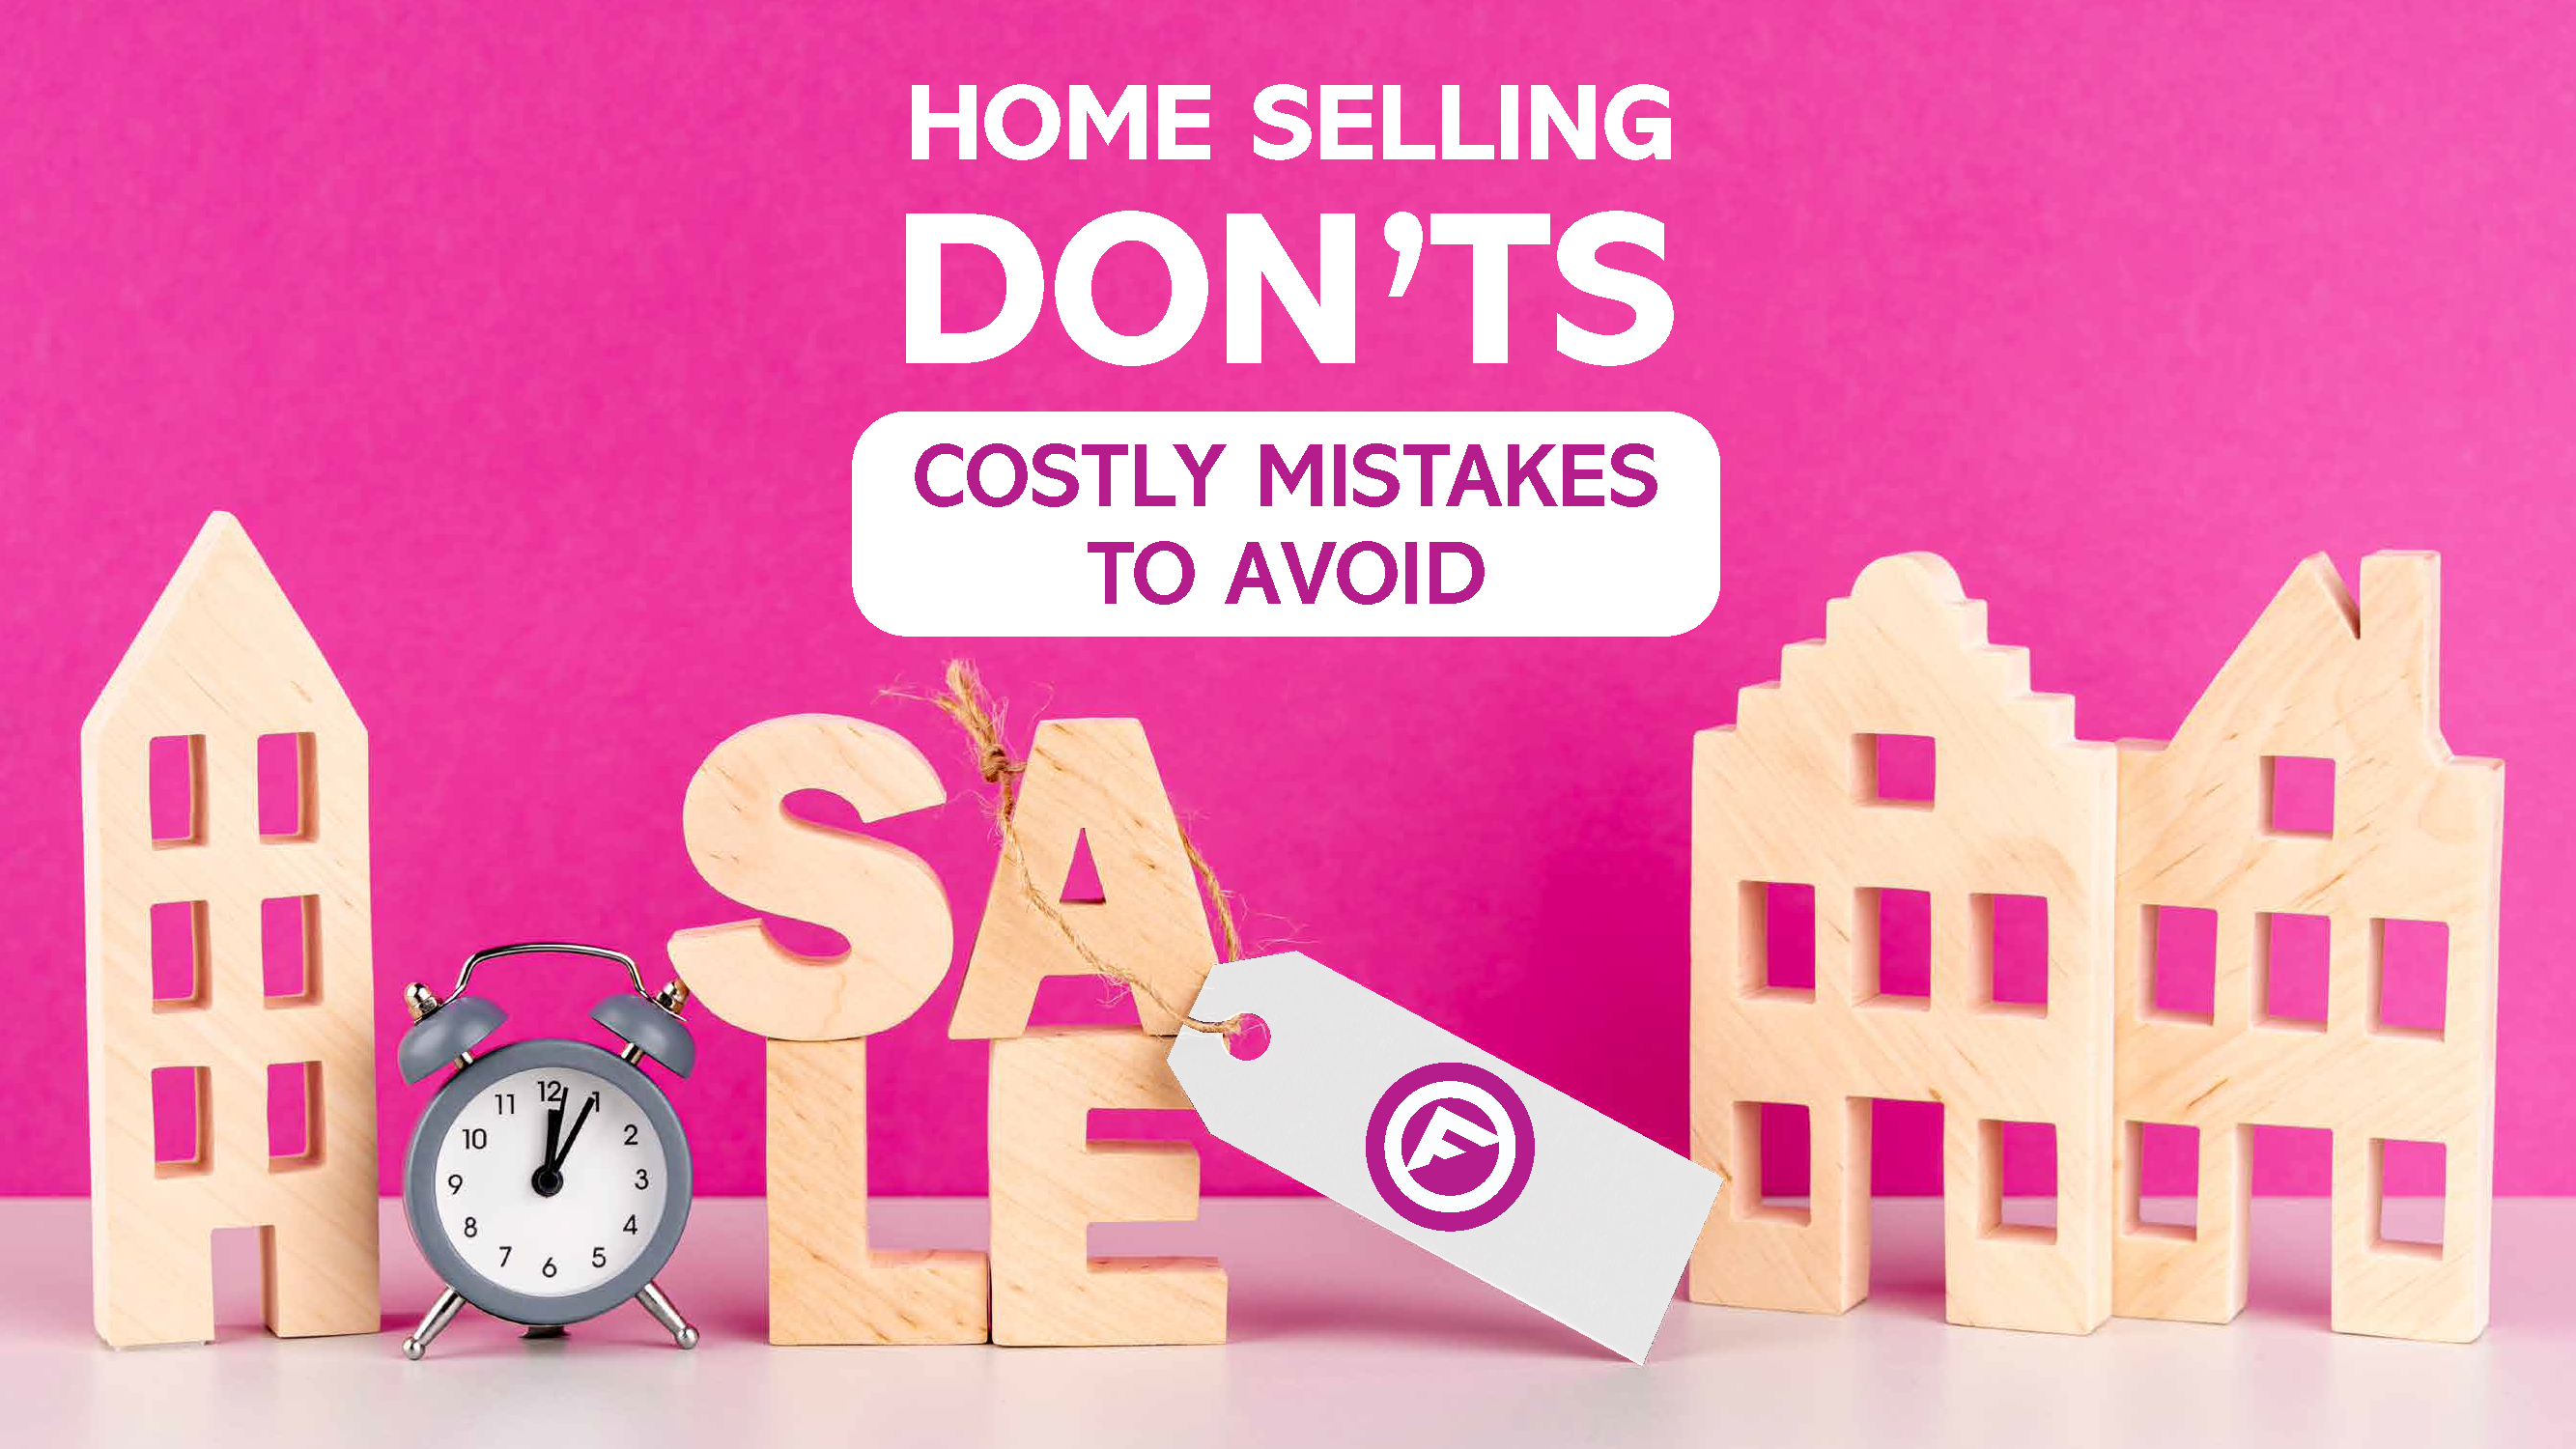 Floorily - Home Selling Don'ts - Costly Mistakes to Avoid